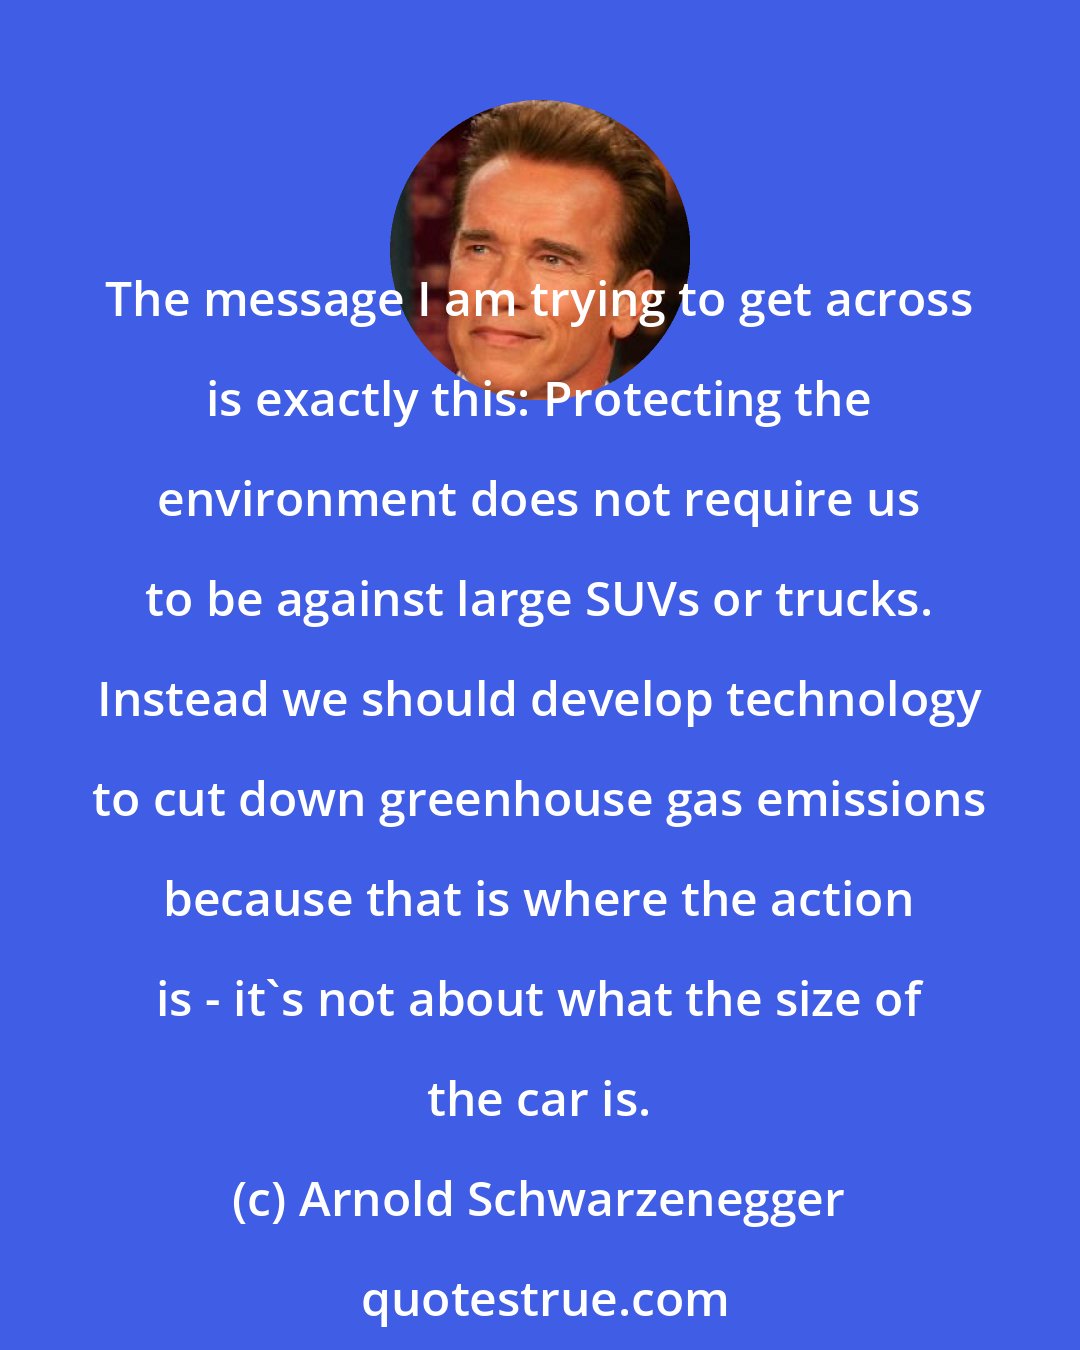 Arnold Schwarzenegger: The message I am trying to get across is exactly this: Protecting the environment does not require us to be against large SUVs or trucks. Instead we should develop technology to cut down greenhouse gas emissions because that is where the action is - it's not about what the size of the car is.